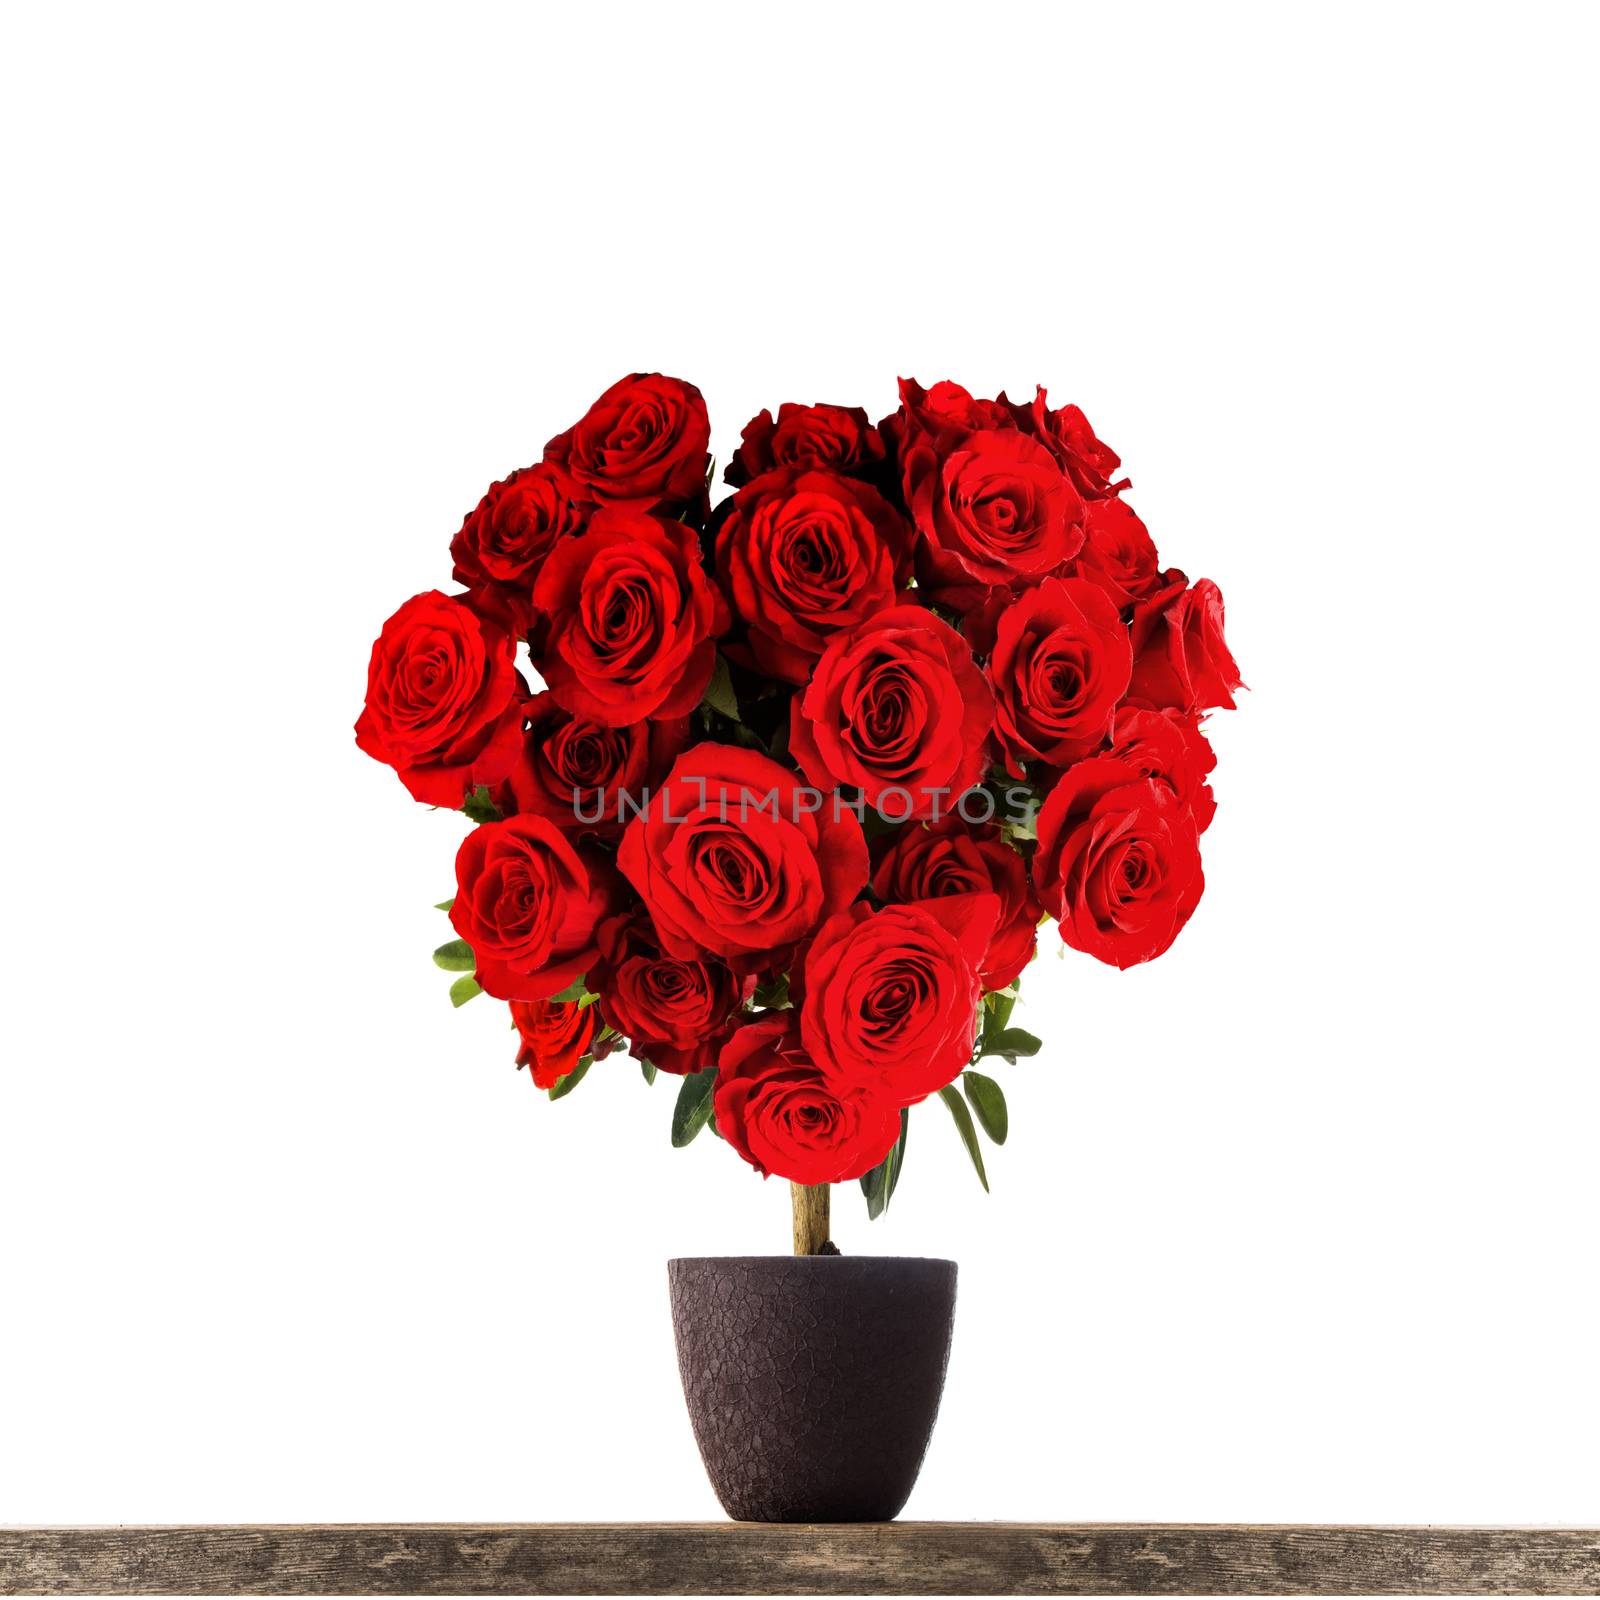 Heart shaped red roses on tree isolated on white background